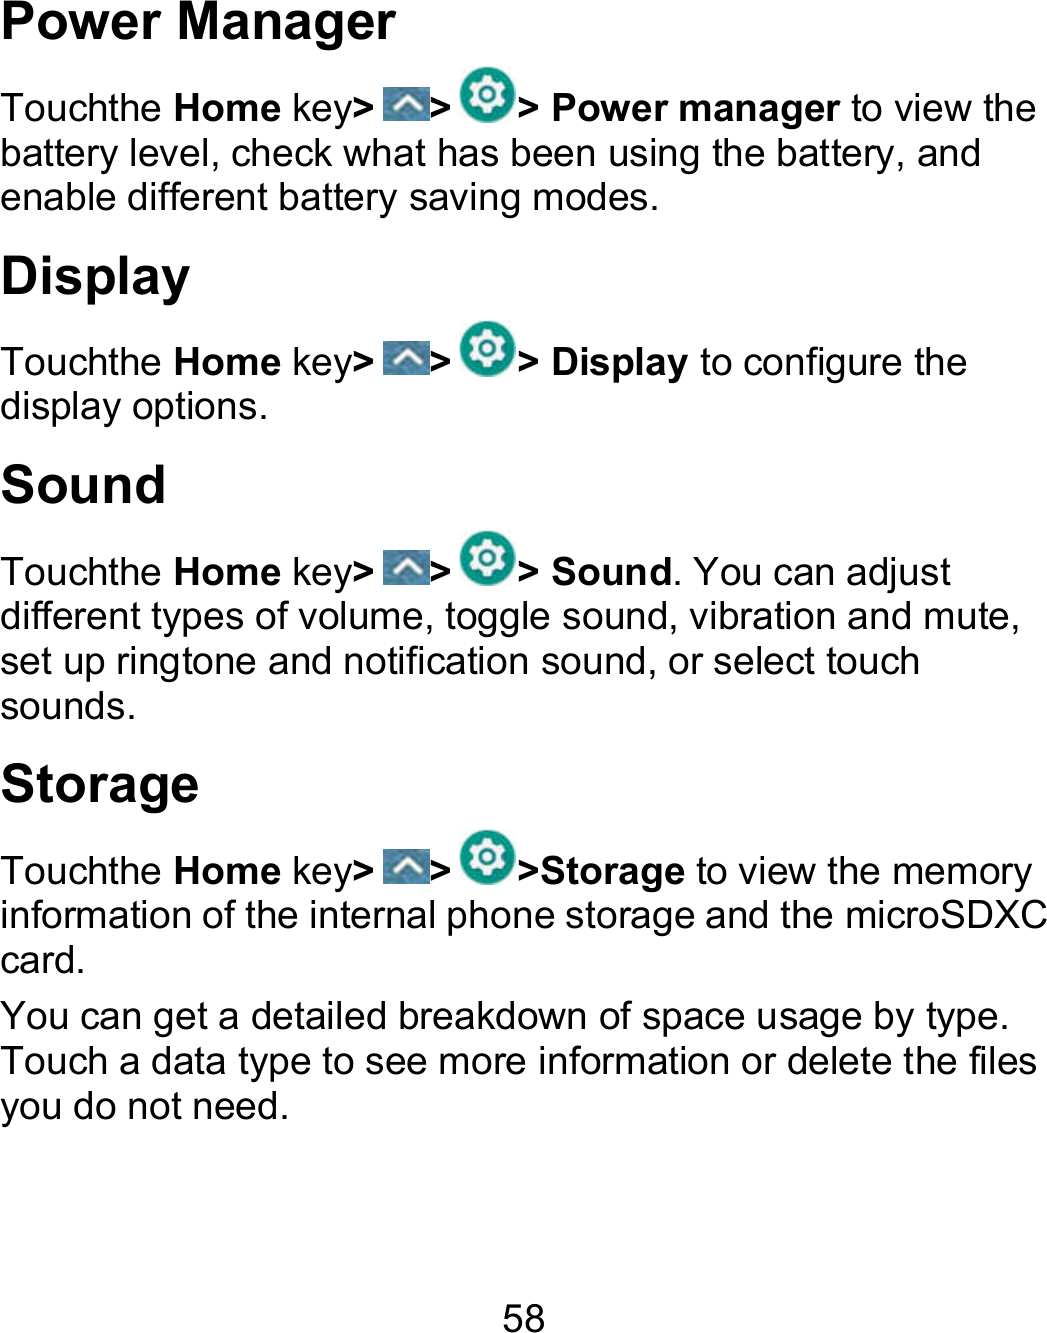 58 Power Manager Touchthe Home key&gt; &gt; &gt; Power manager to view the battery level, check what has been using the battery, and enable different battery saving modes. Display Touchthe Home key&gt; &gt; &gt; Display to configure the display options. Sound Touchthe Home key&gt; &gt; &gt; Sound. You can adjust different types of volume, toggle sound, vibration and mute, set up ringtone and notification sound, or select touch sounds. Storage Touchthe Home key&gt; &gt; &gt;Storage to view the memory information of the internal phone storage and the microSDXC card. You can get a detailed breakdown of space usage by type. Touch a data type to see more information or delete the files you do not need. 